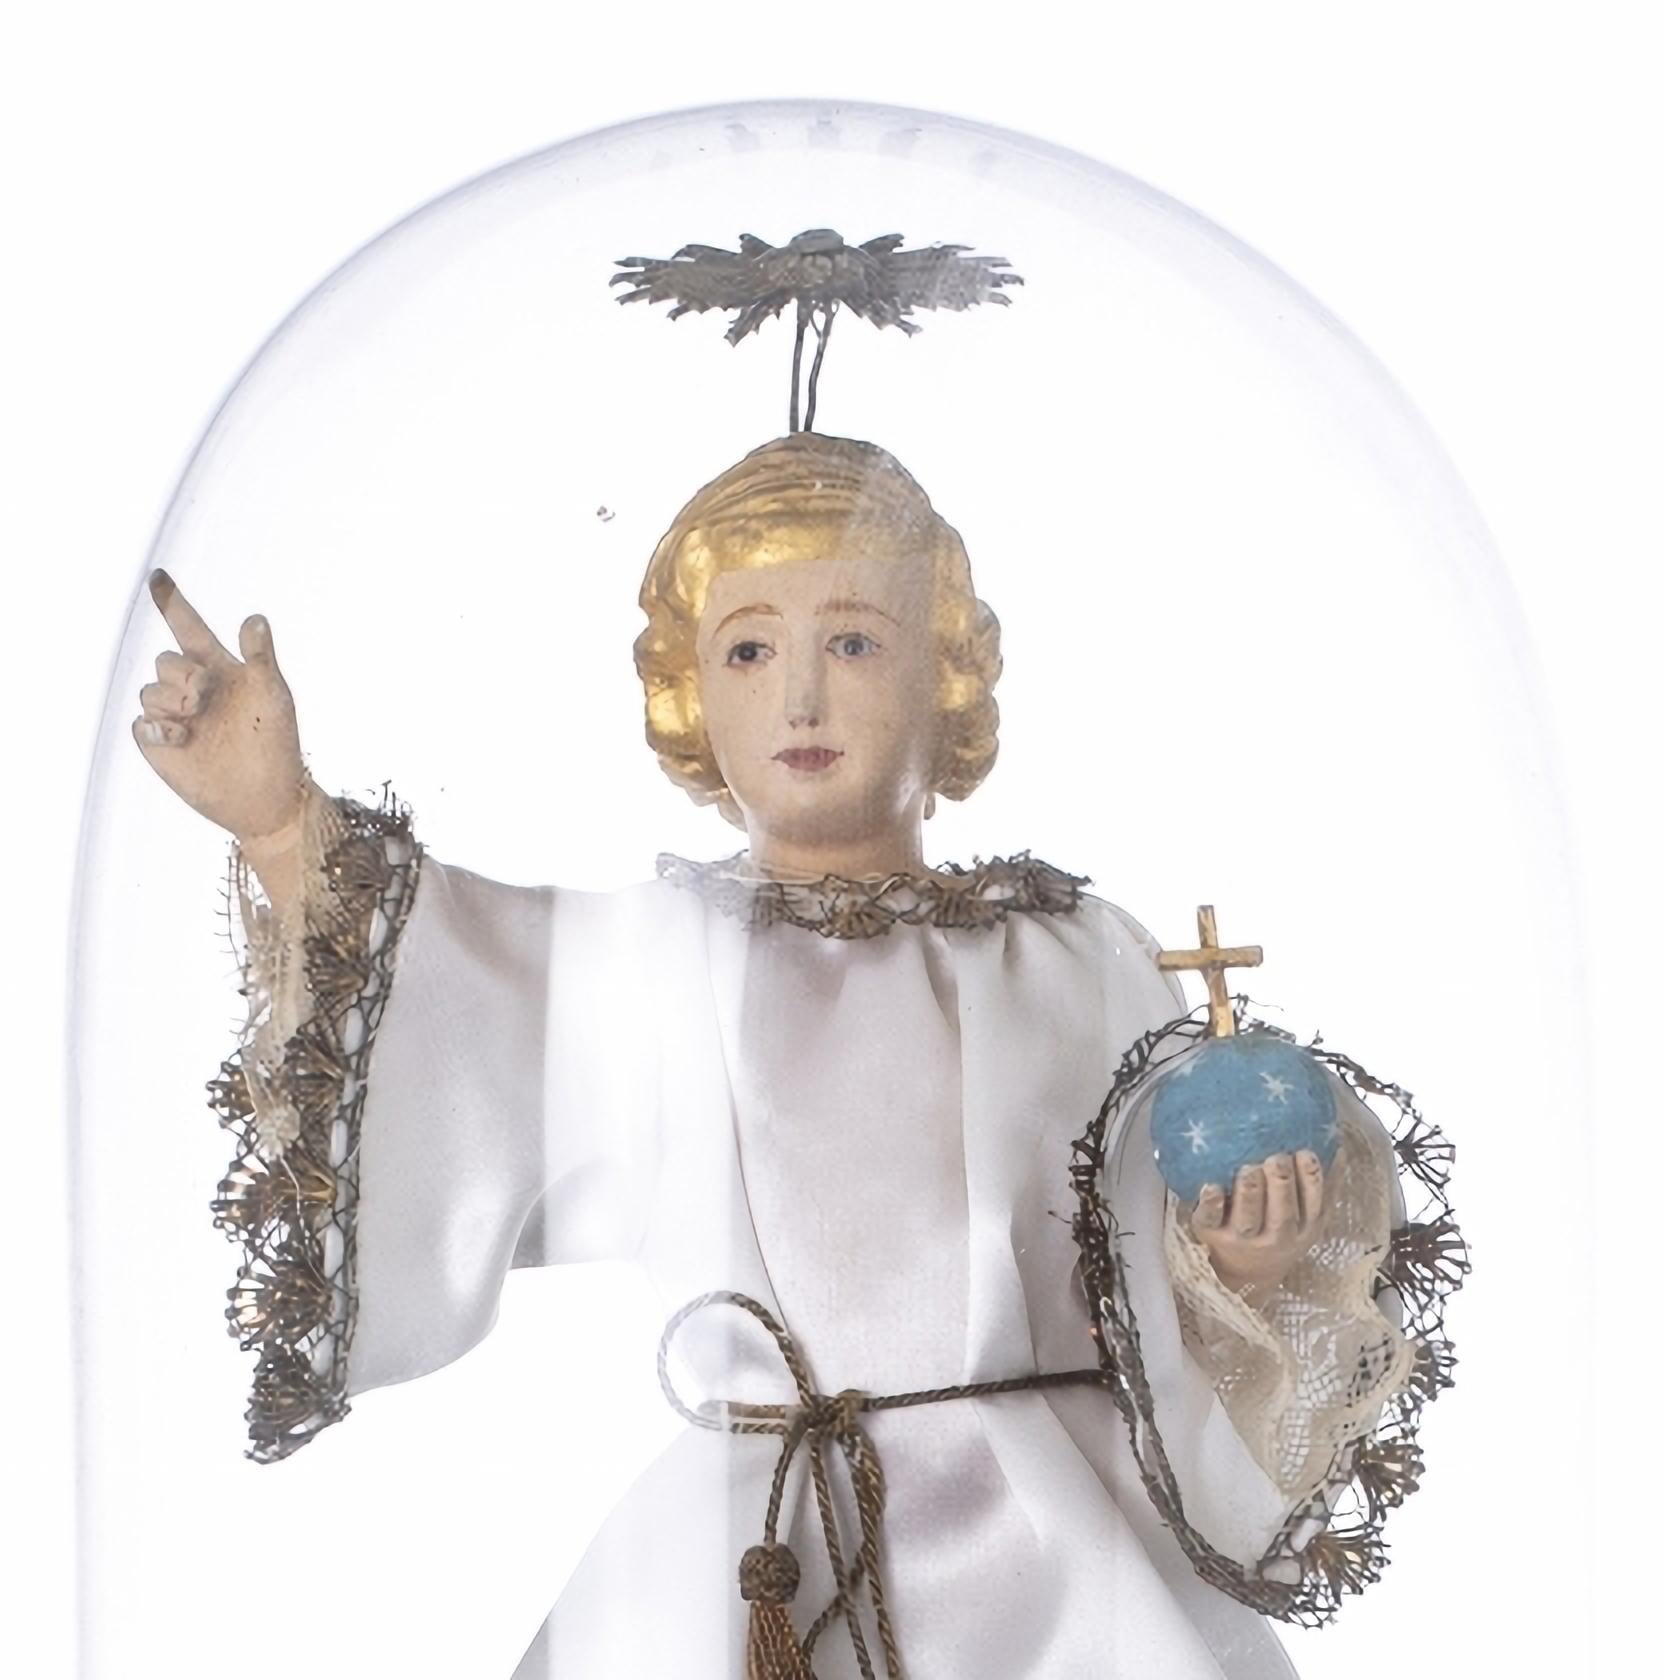 CHILD JESUS SAVIOR OF THE WORLD 18th Century

portuguese sculpture
in polychrome and gilded wood with fabric cover. Mounted on a spherical base and golden plinth. Shine in silver, unmarked,
With dome in glass seat on wooden base.
. Dec. Height: